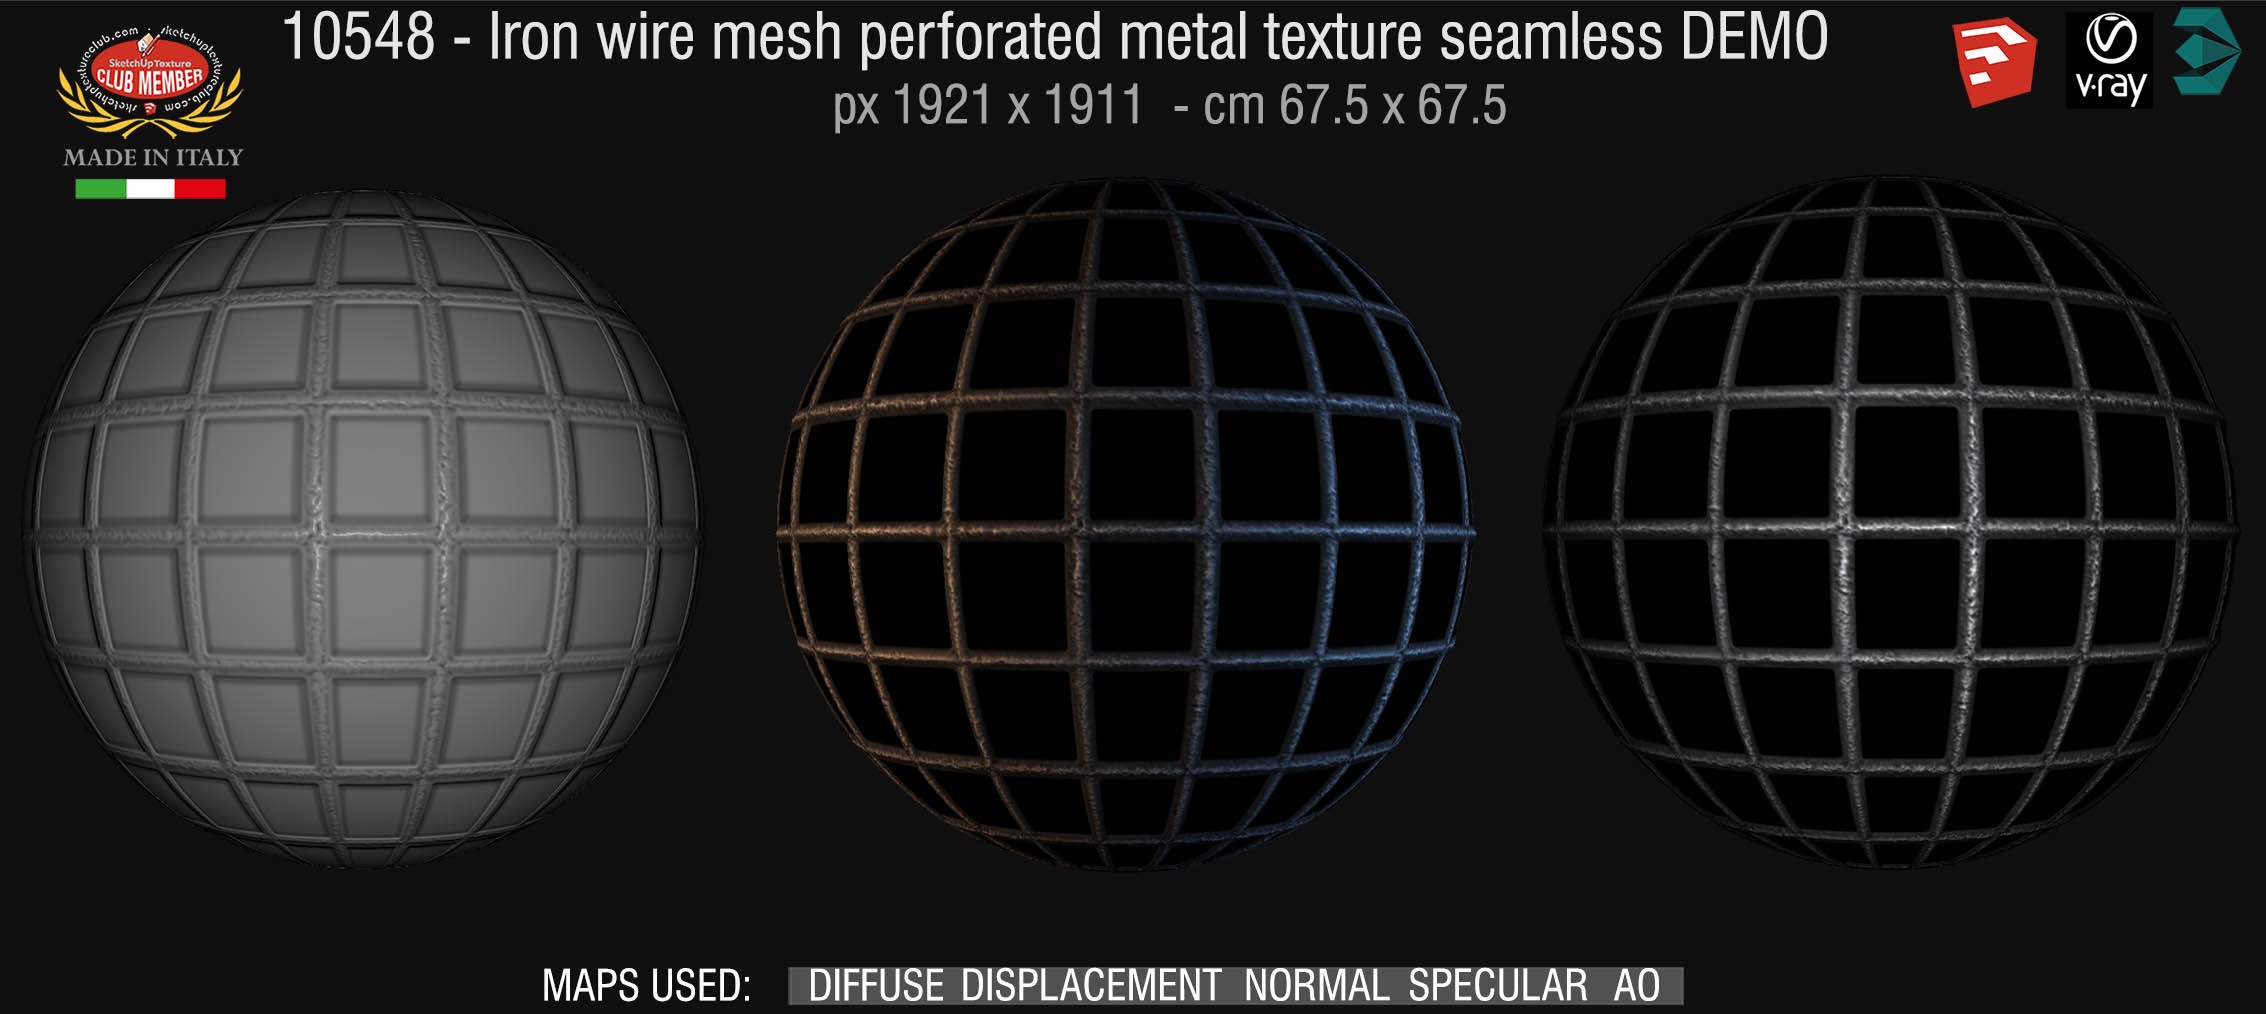 10548 HR Iron wire mesh perforate metal texture seamless + maps DEMO